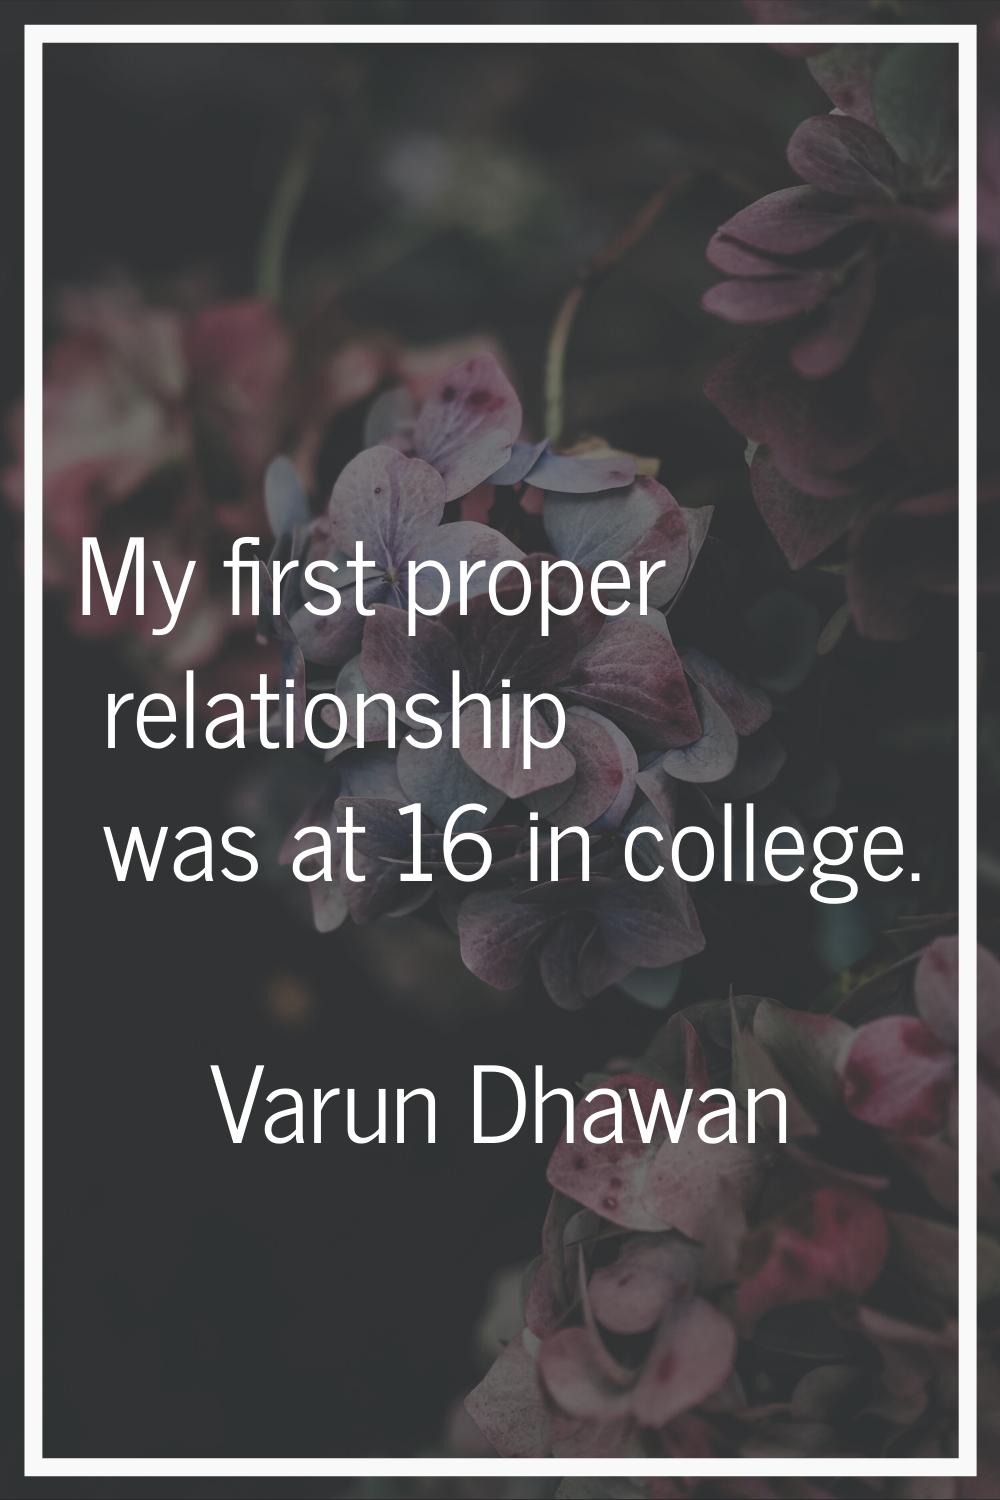 My first proper relationship was at 16 in college.